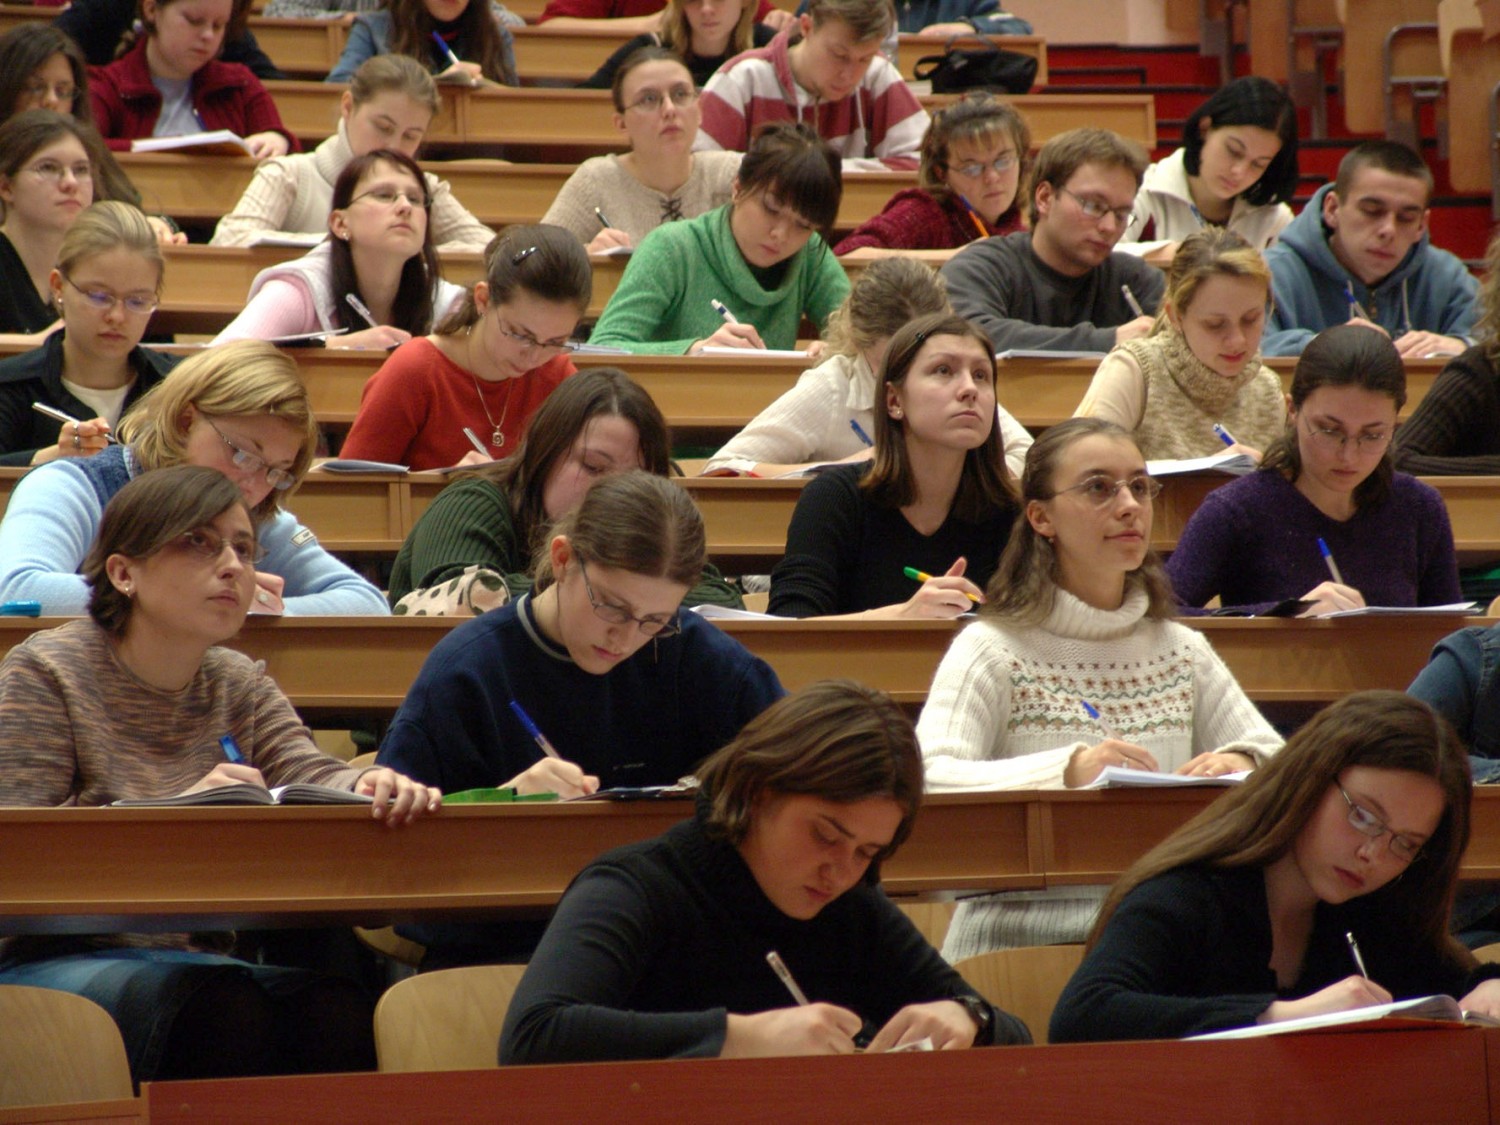 Students in a large lecture hall in the US